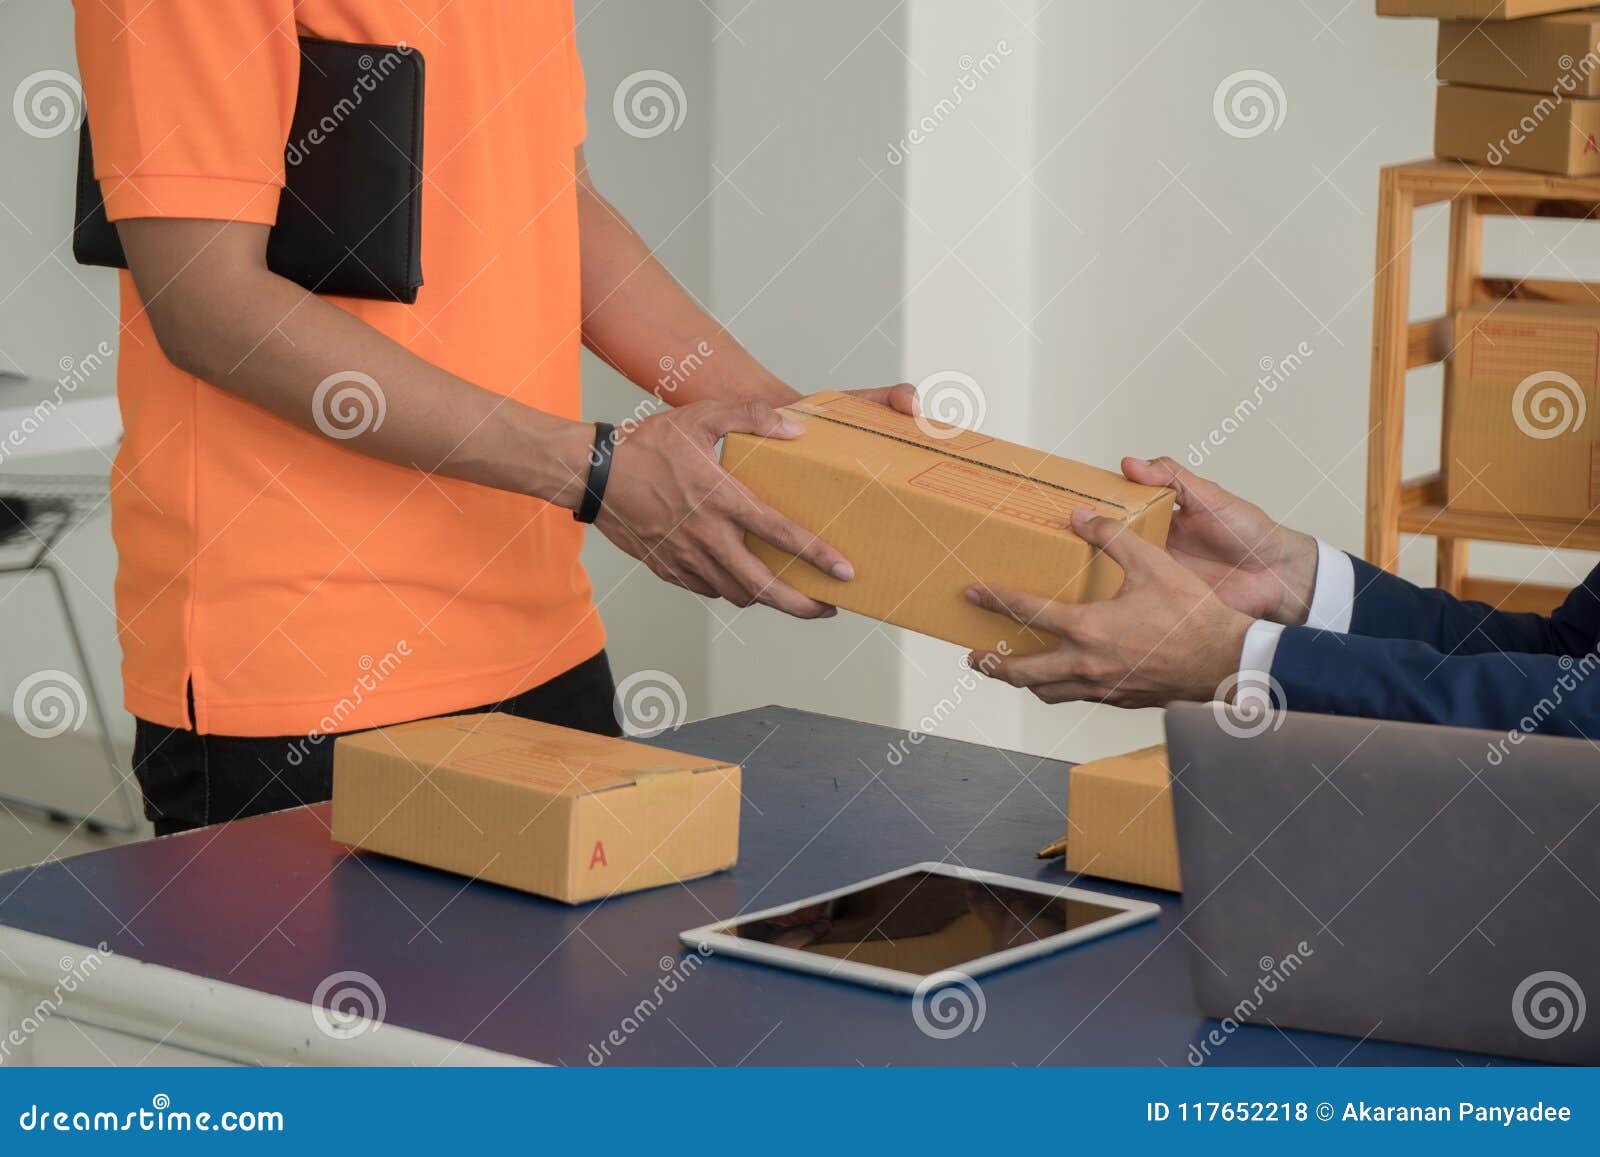 deliverer giving package box to business man.